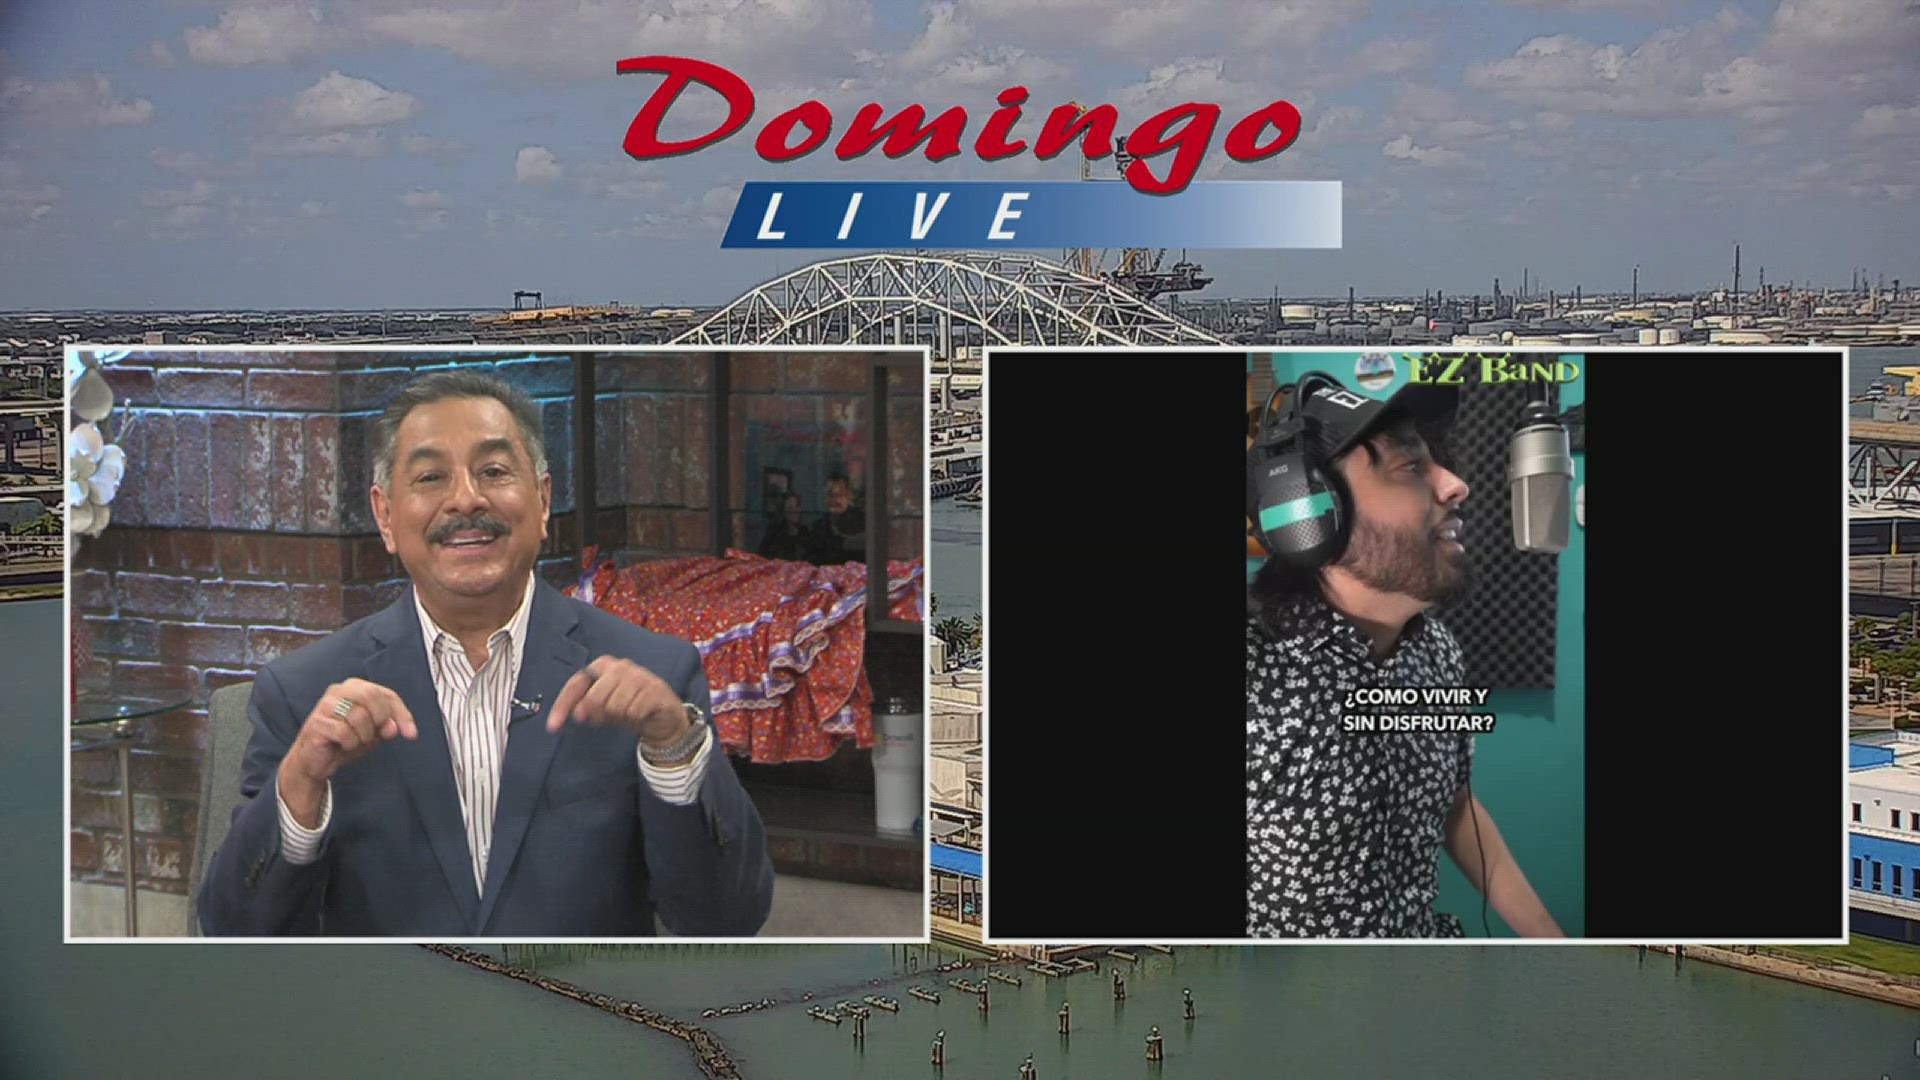 This week, Domingo Live introduces a band that is spreading Tejano and norteño love online by covering popular songs... and with an accordion from Corpus Christi!